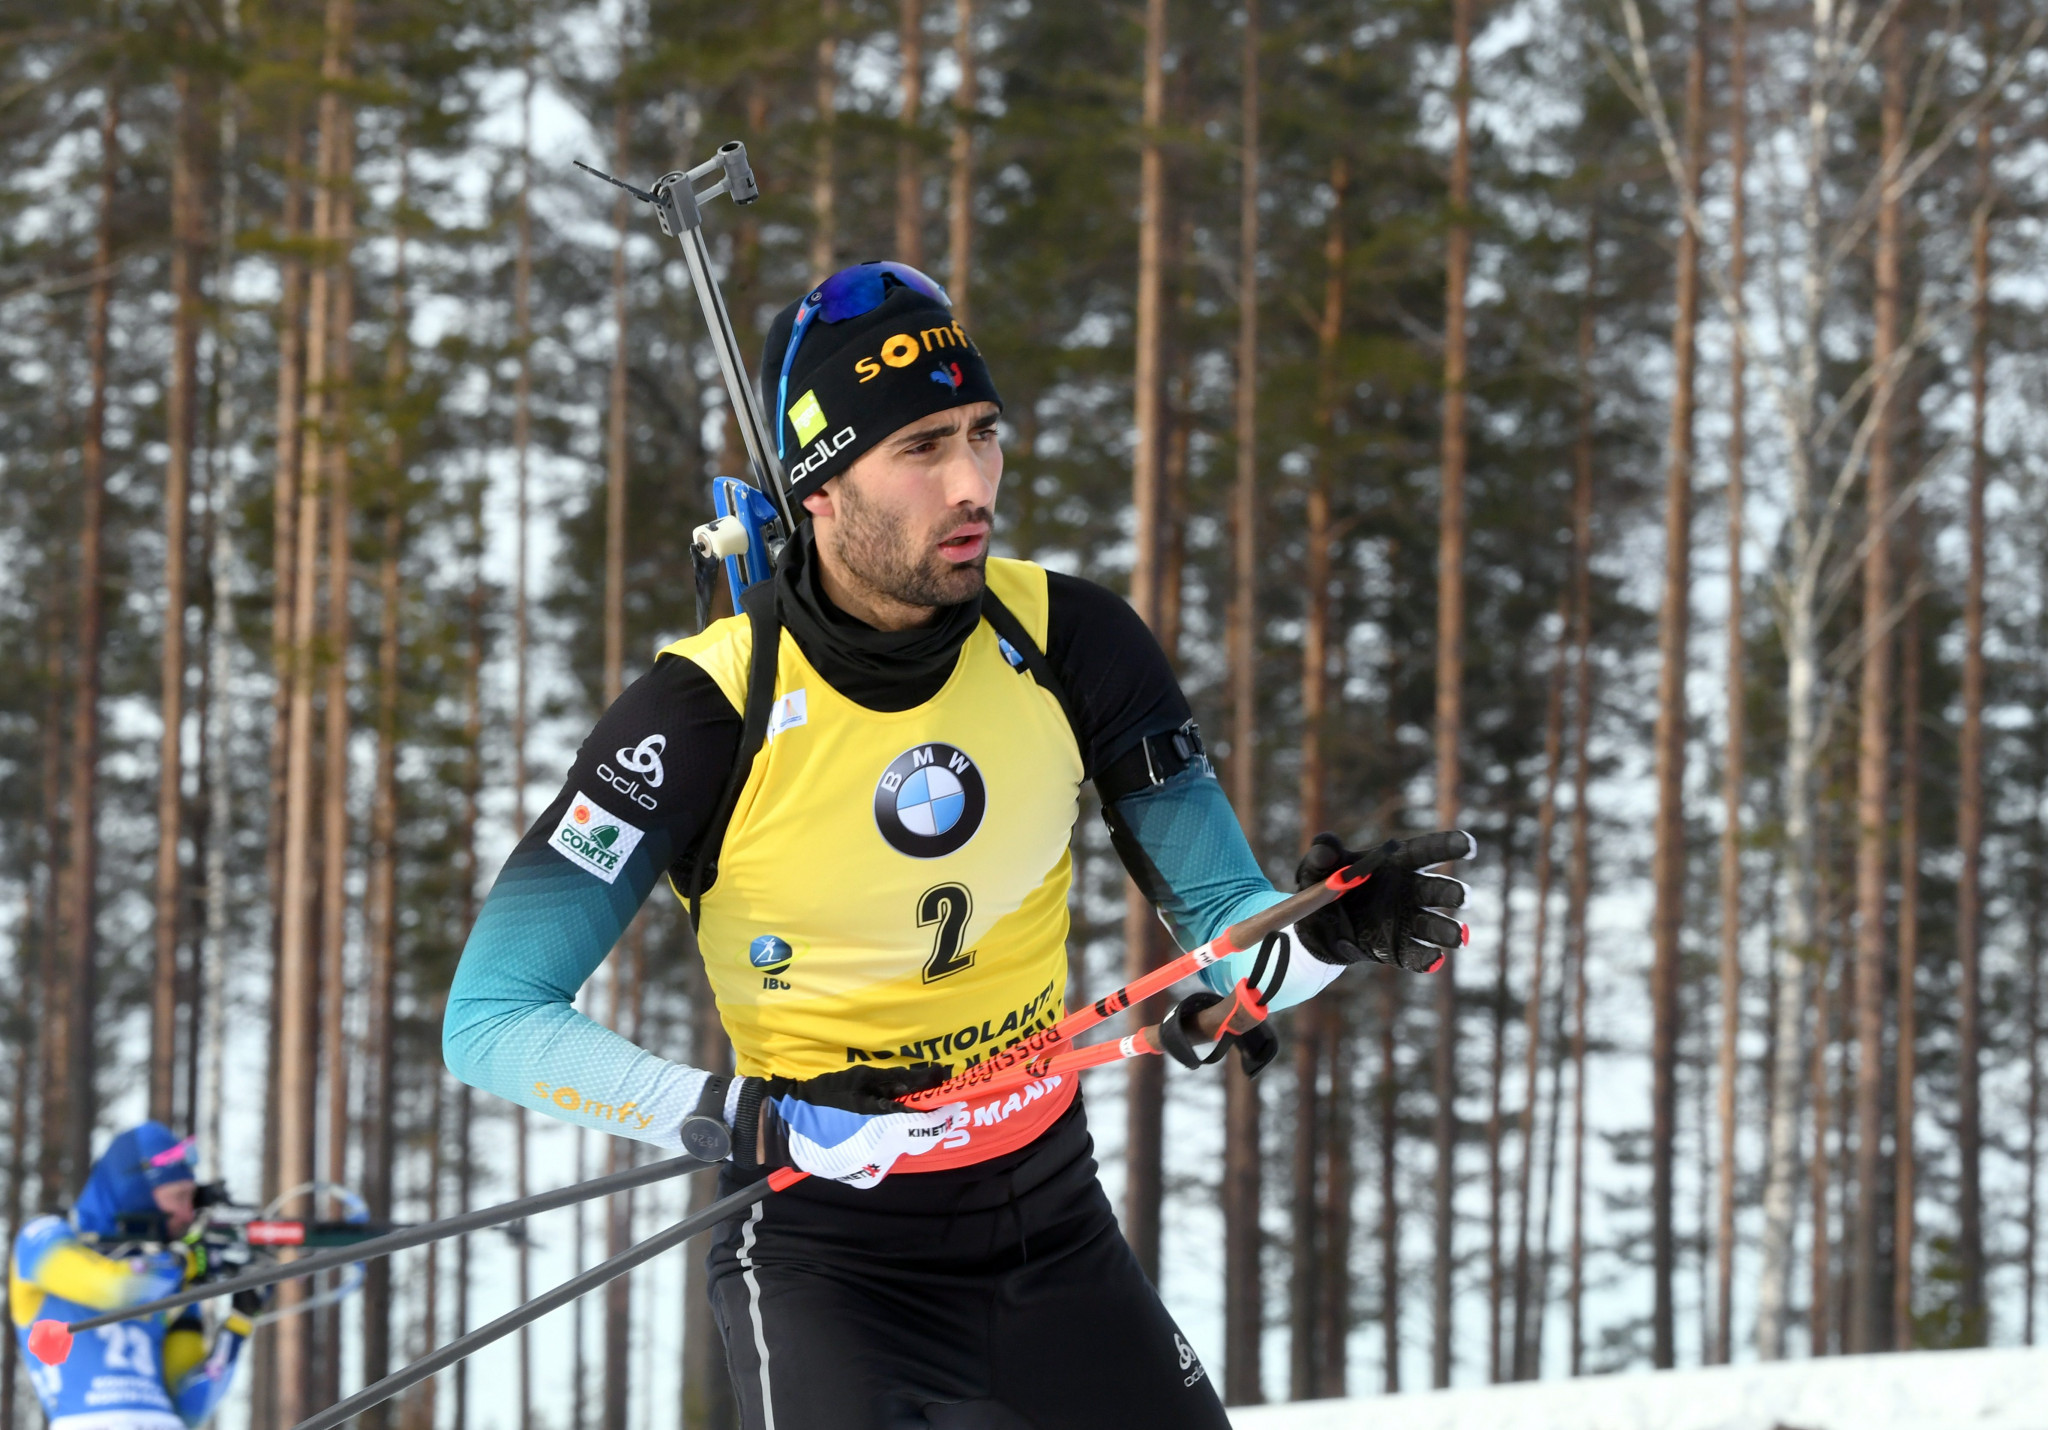 Another French IOC member Martin Fourcade has said he would be 